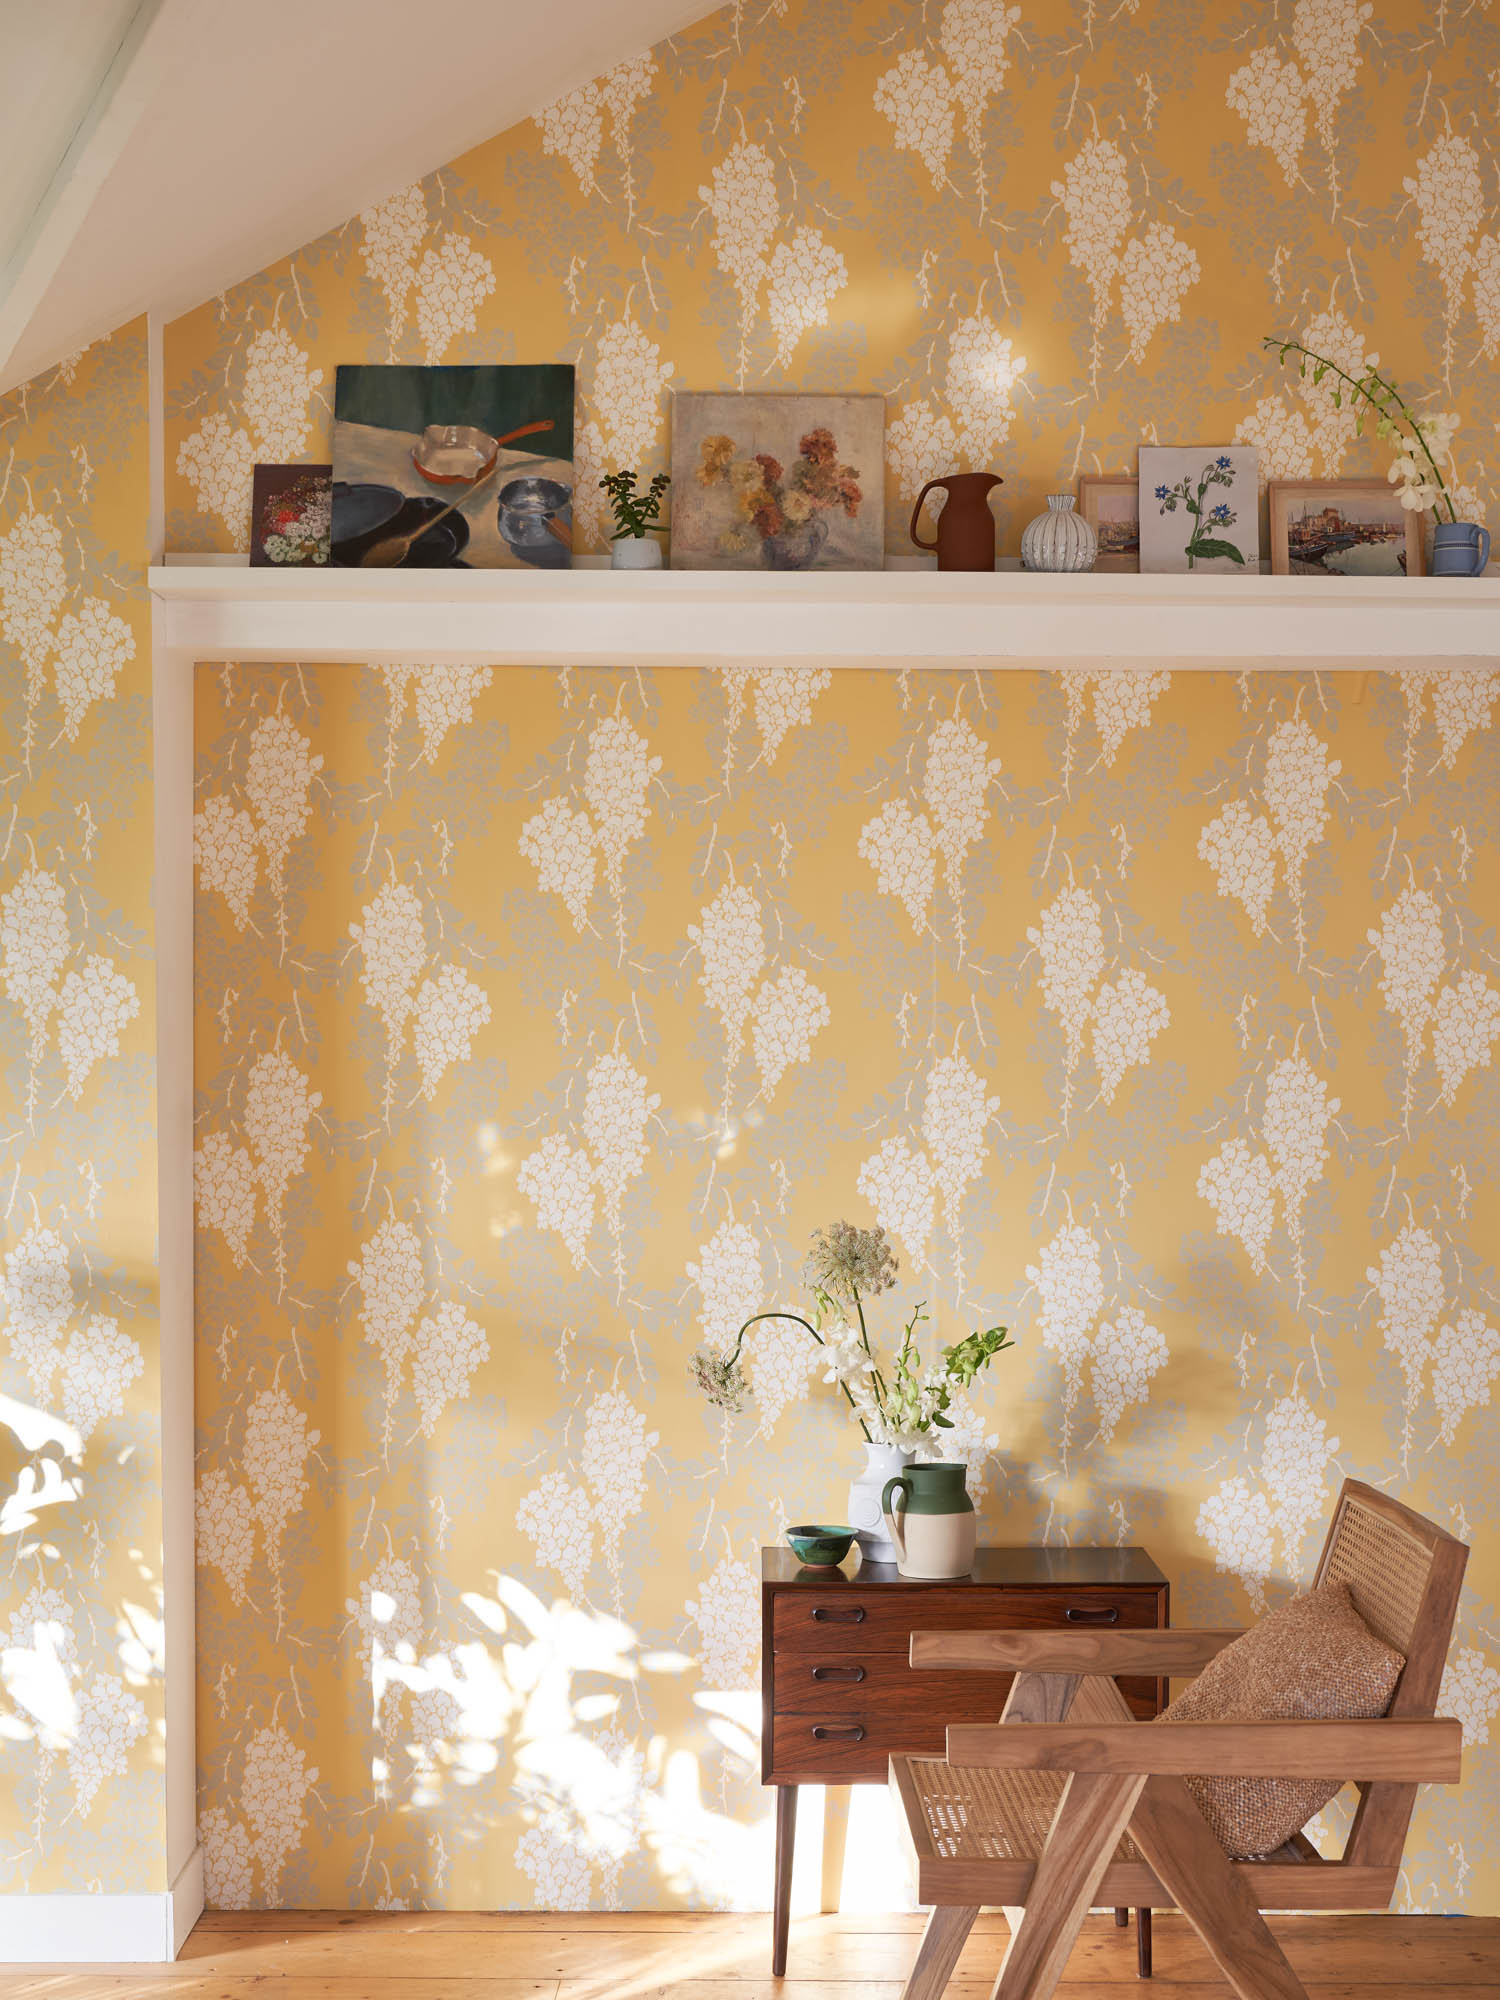 Farrow and Ball's Wisteria wallpaper in a home office